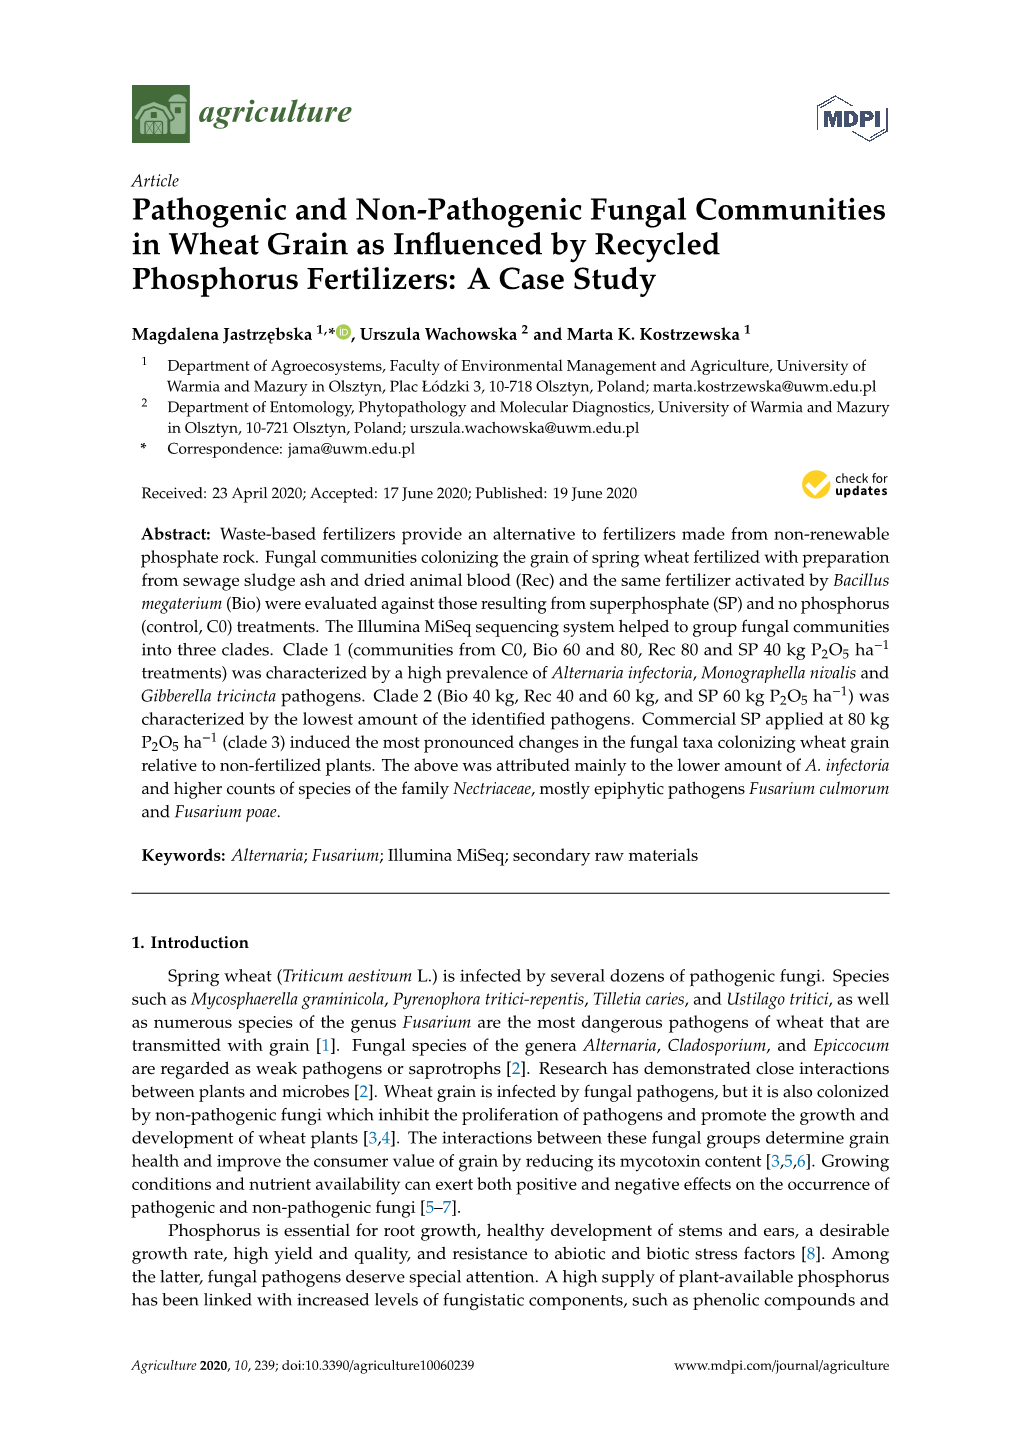 Pathogenic and Non-Pathogenic Fungal Communities in Wheat Grain As Inﬂuenced by Recycled Phosphorus Fertilizers: a Case Study